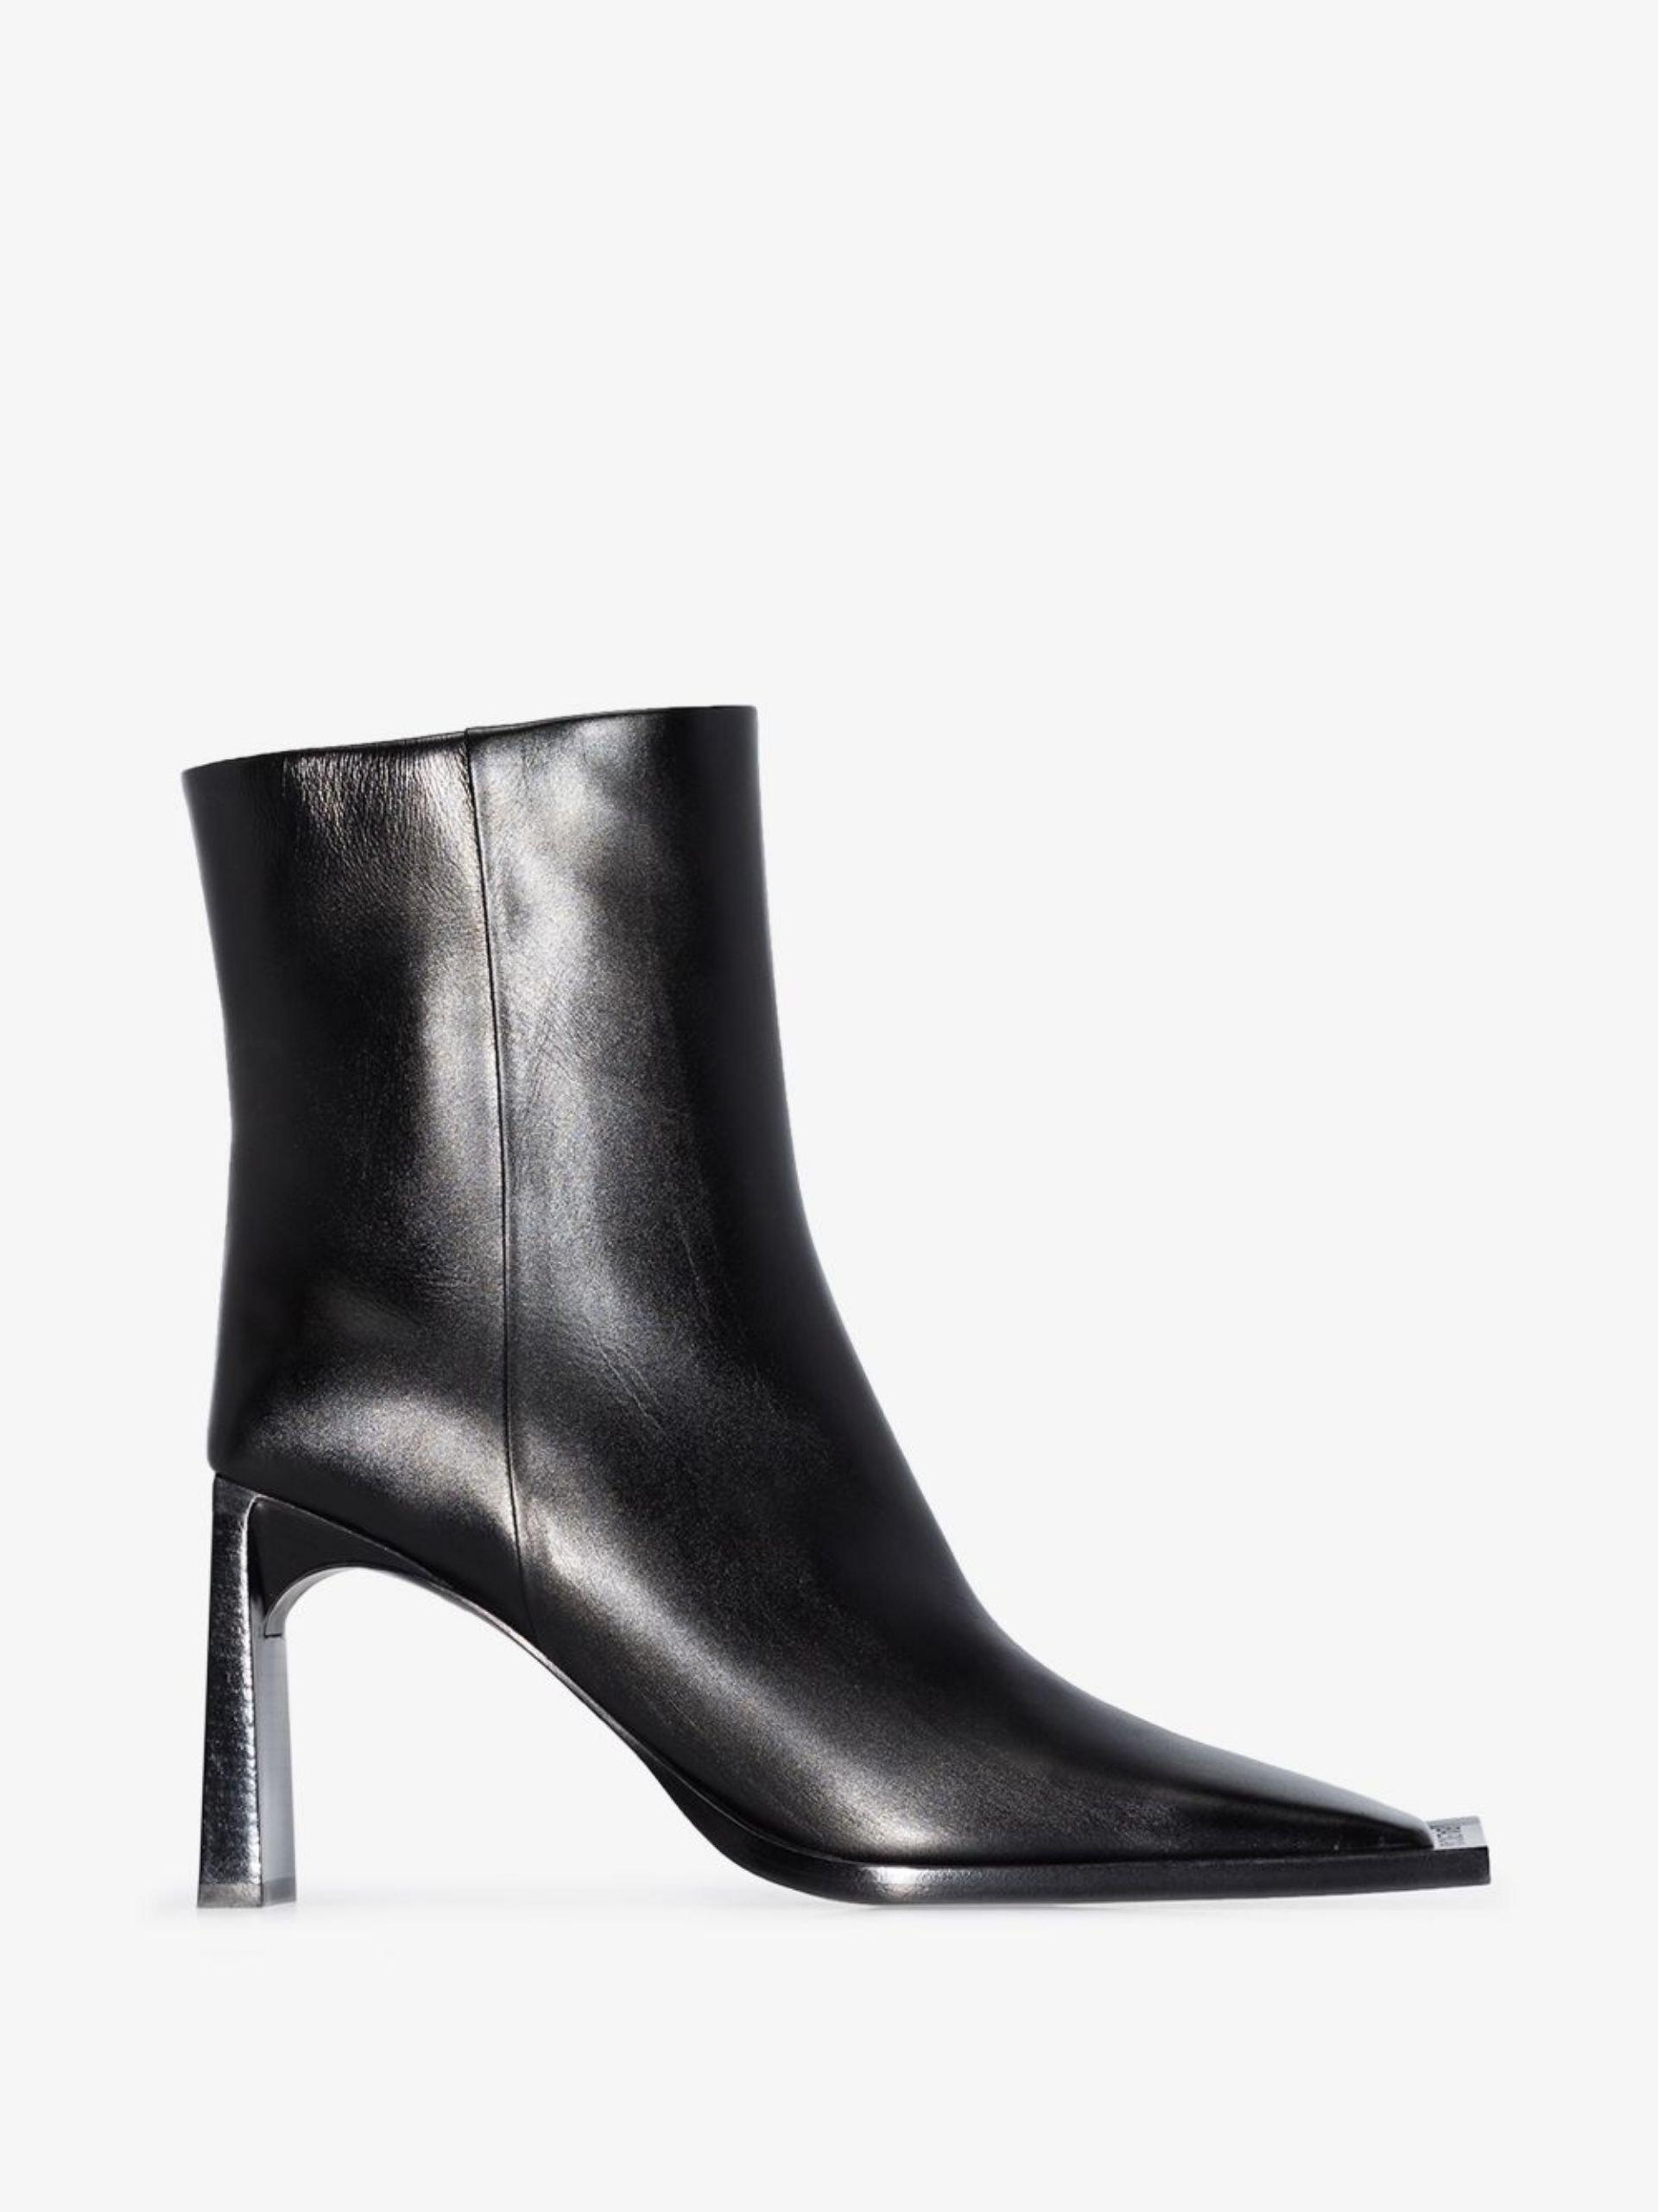 Balenciaga Square-toe Ankle-length Boots - Women's - Leather in Black ...